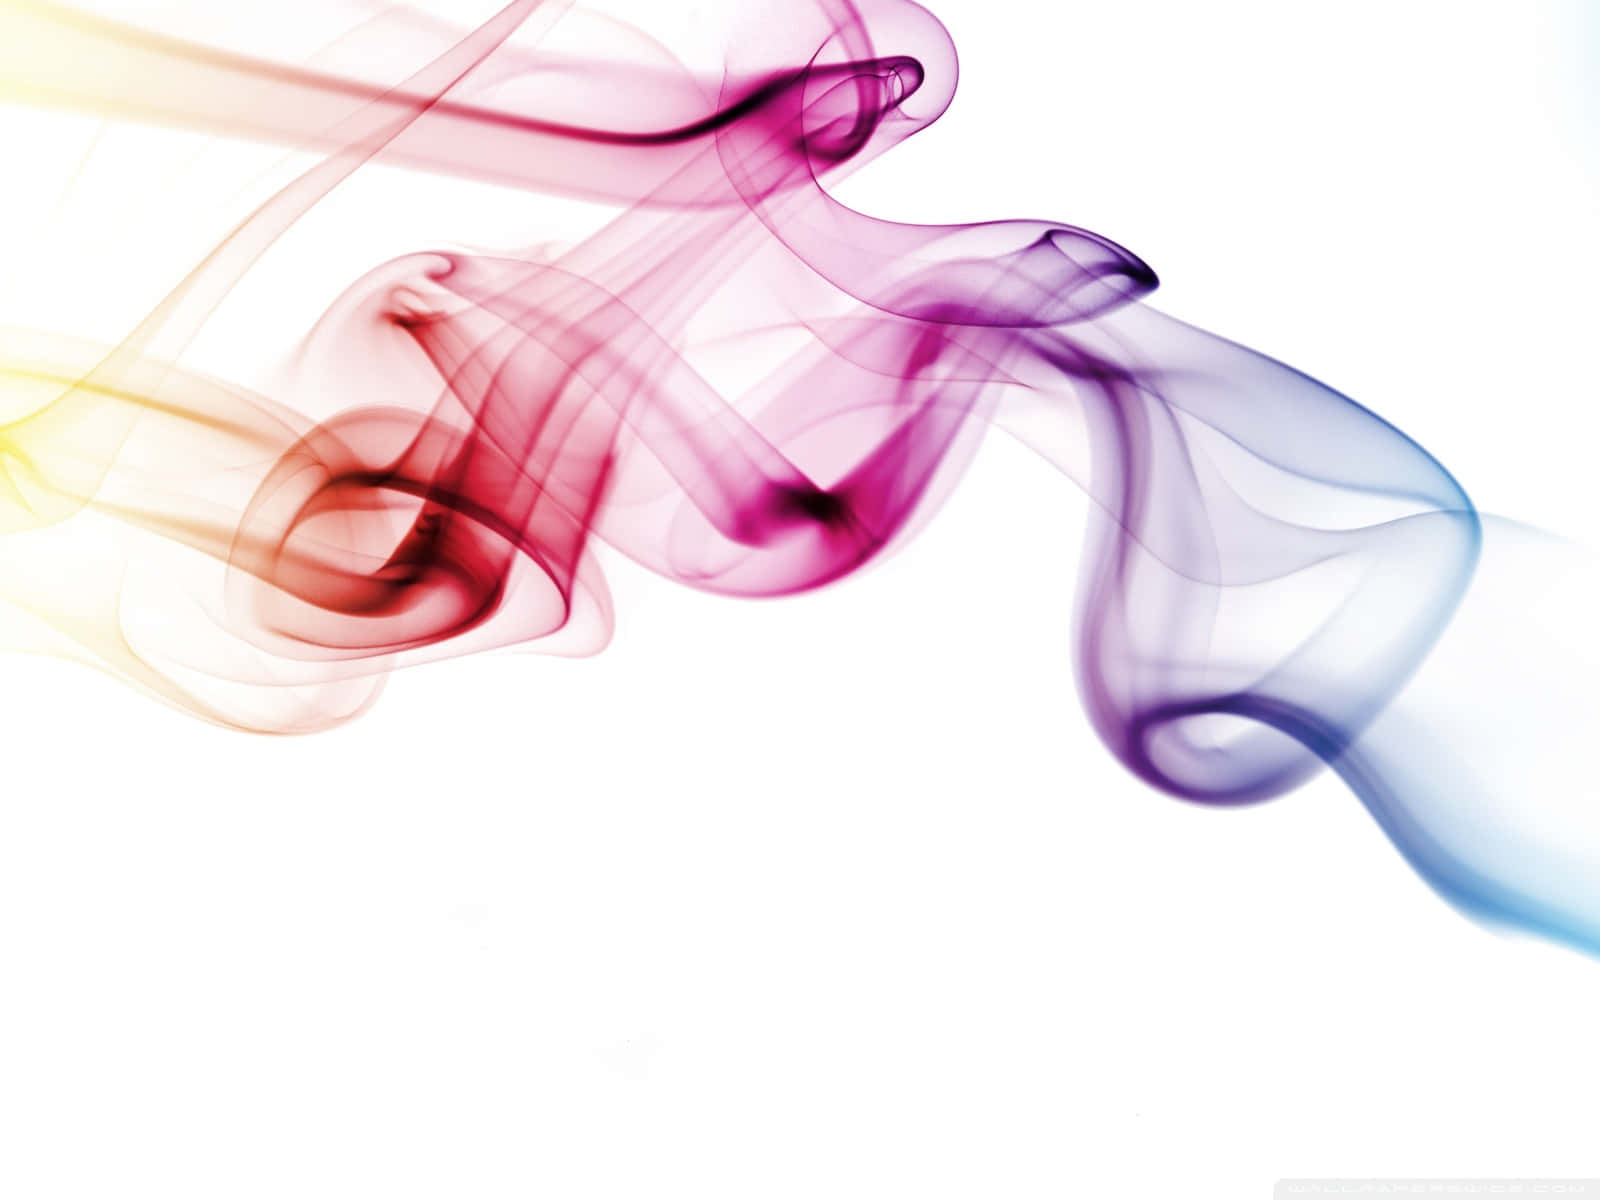 100+] Colorful Smoke Background s for FREE 